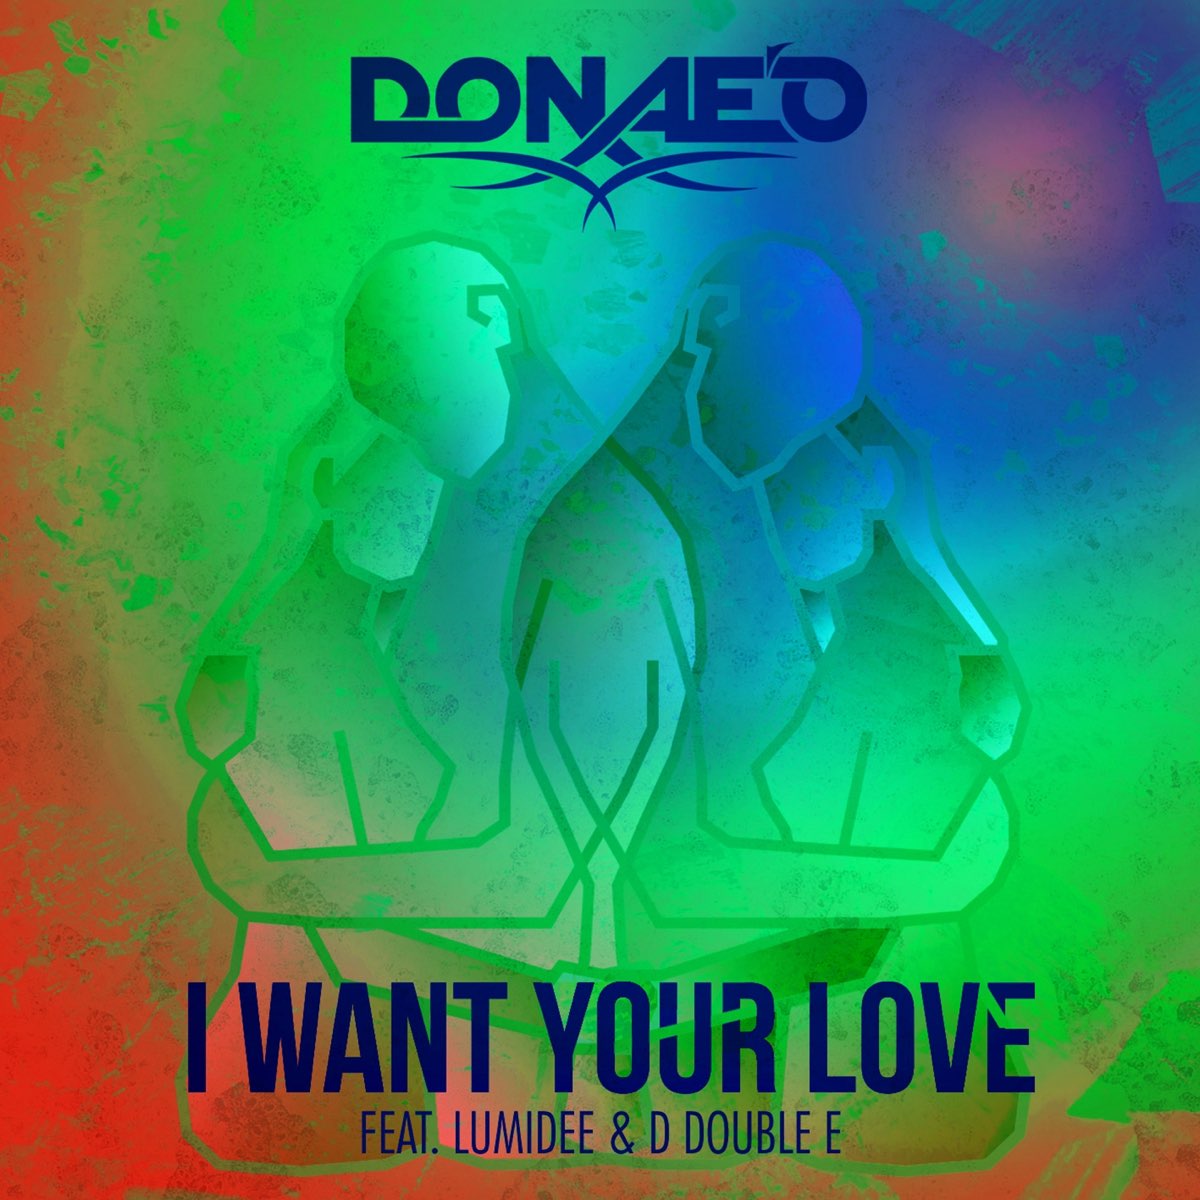 Remix love 1. Want your Love. I want your Love. Топ i want your Love.